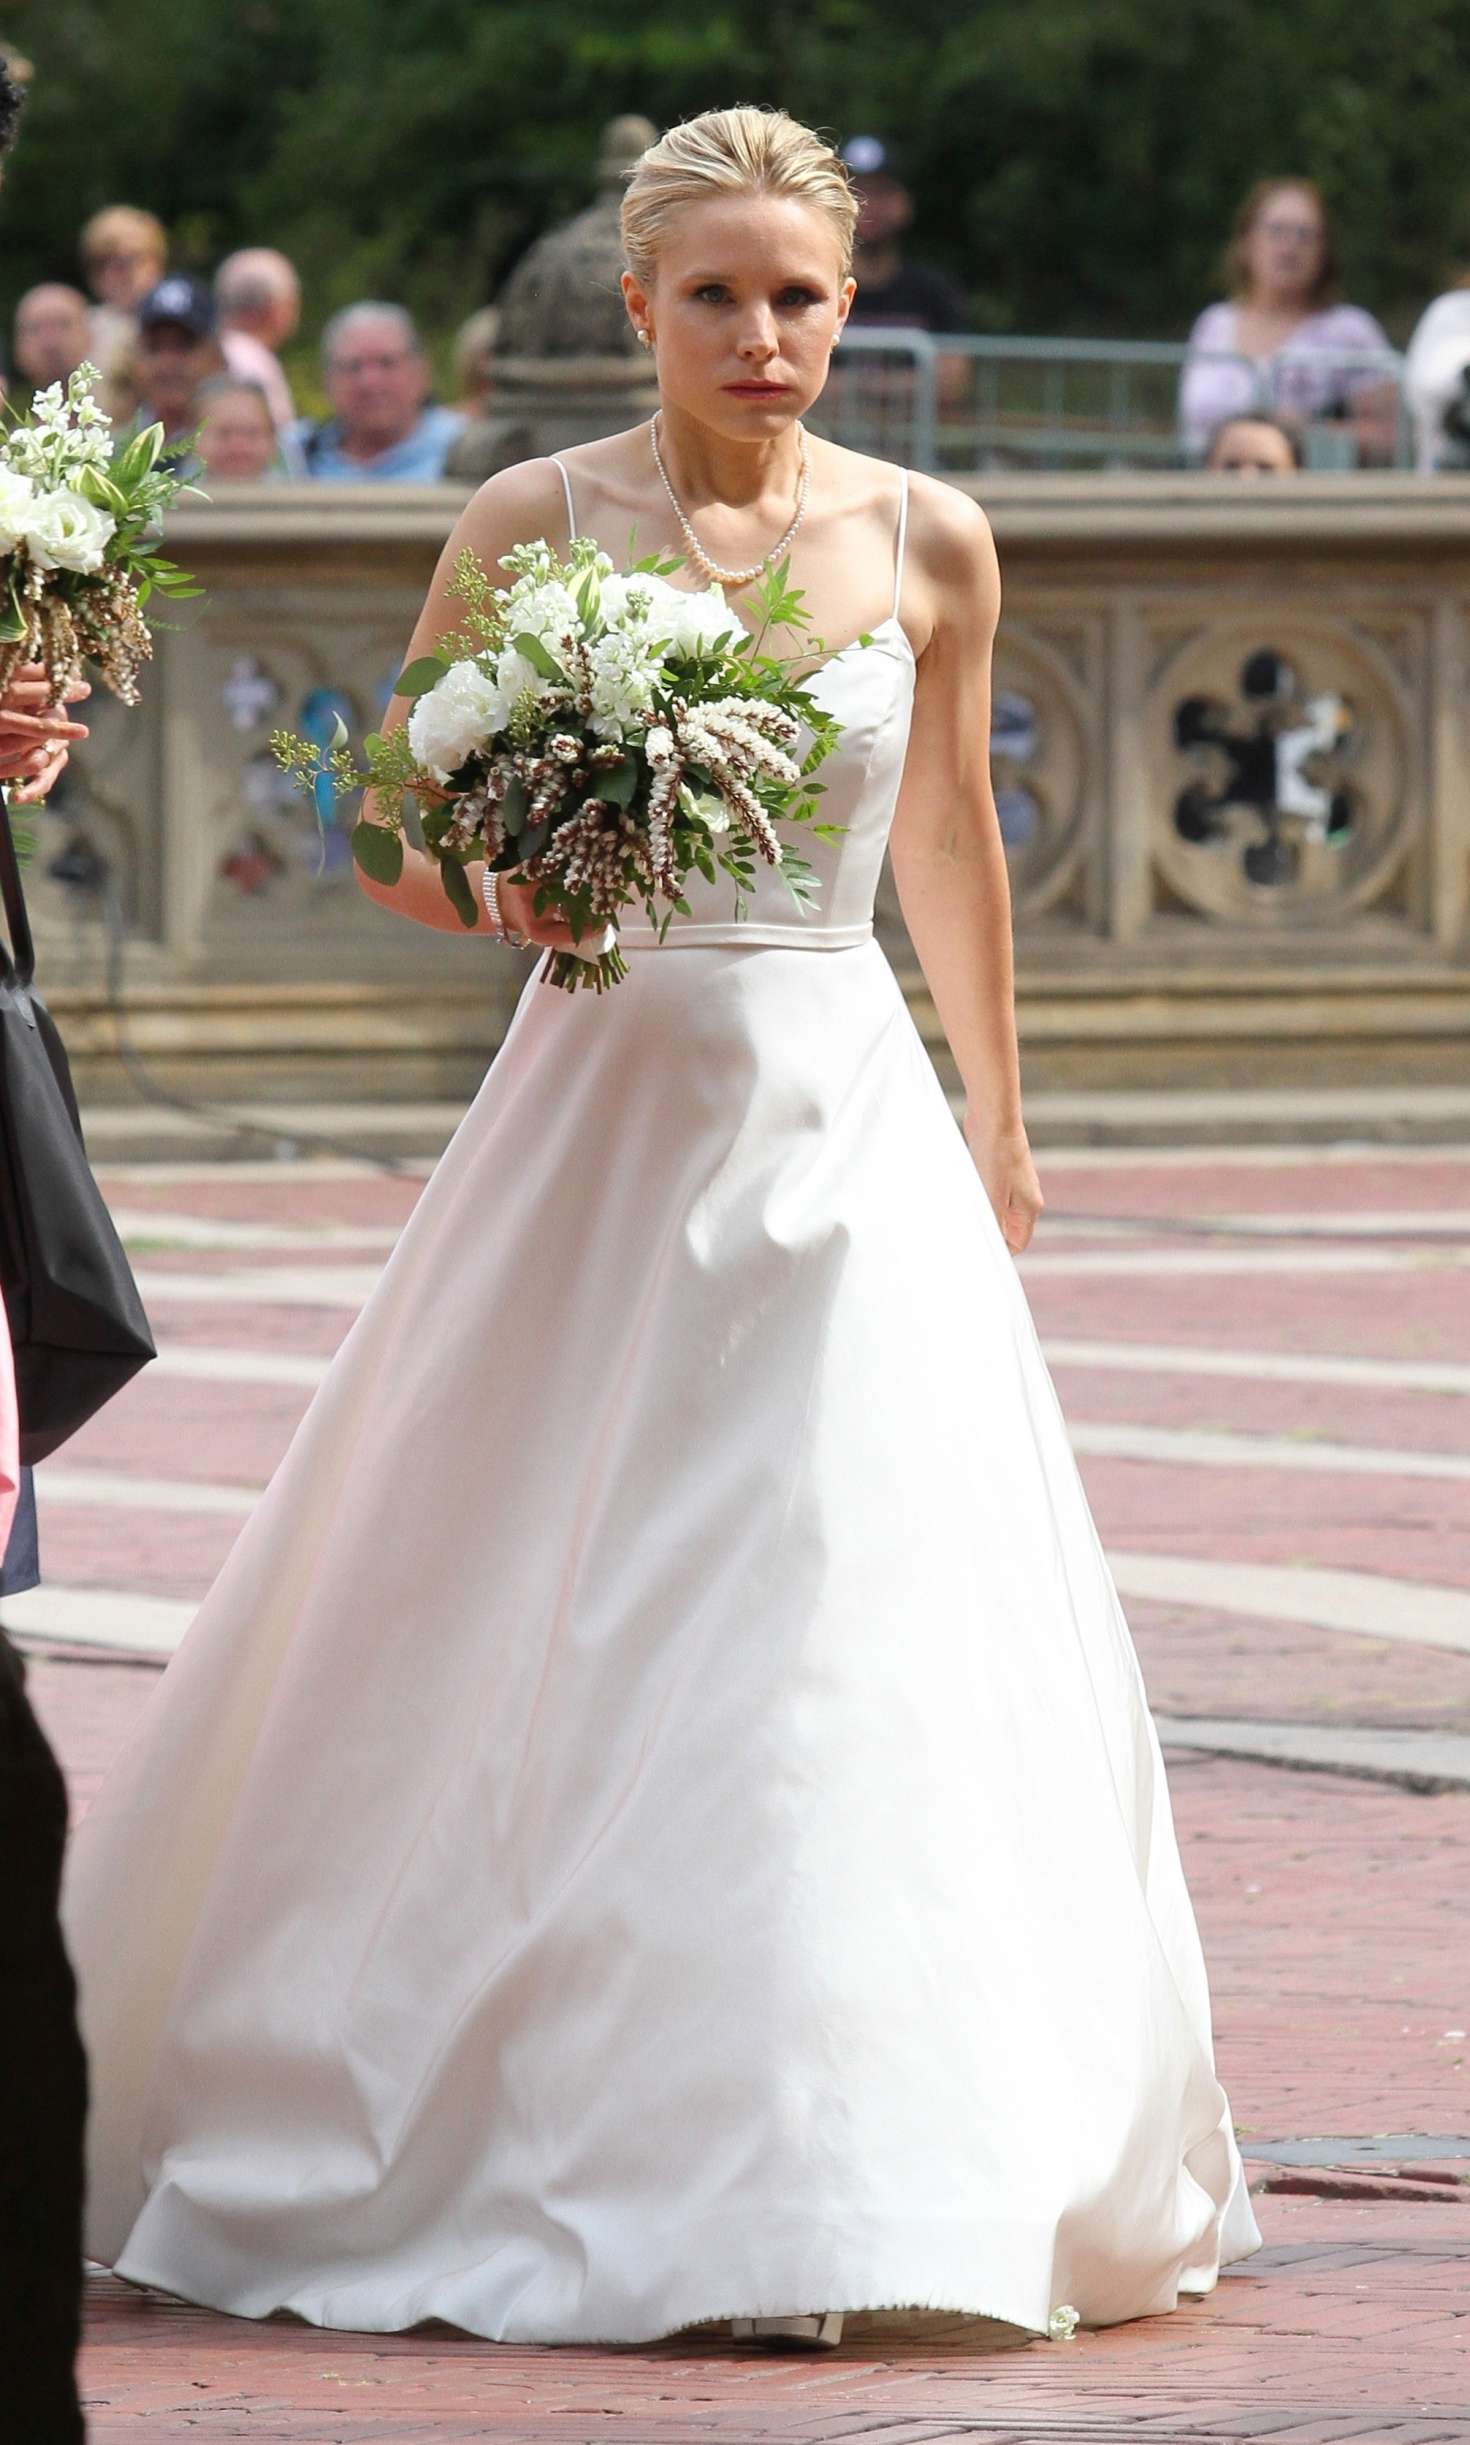 Kristen Bell dons a wedding dress filming 'Like Father' in NYC